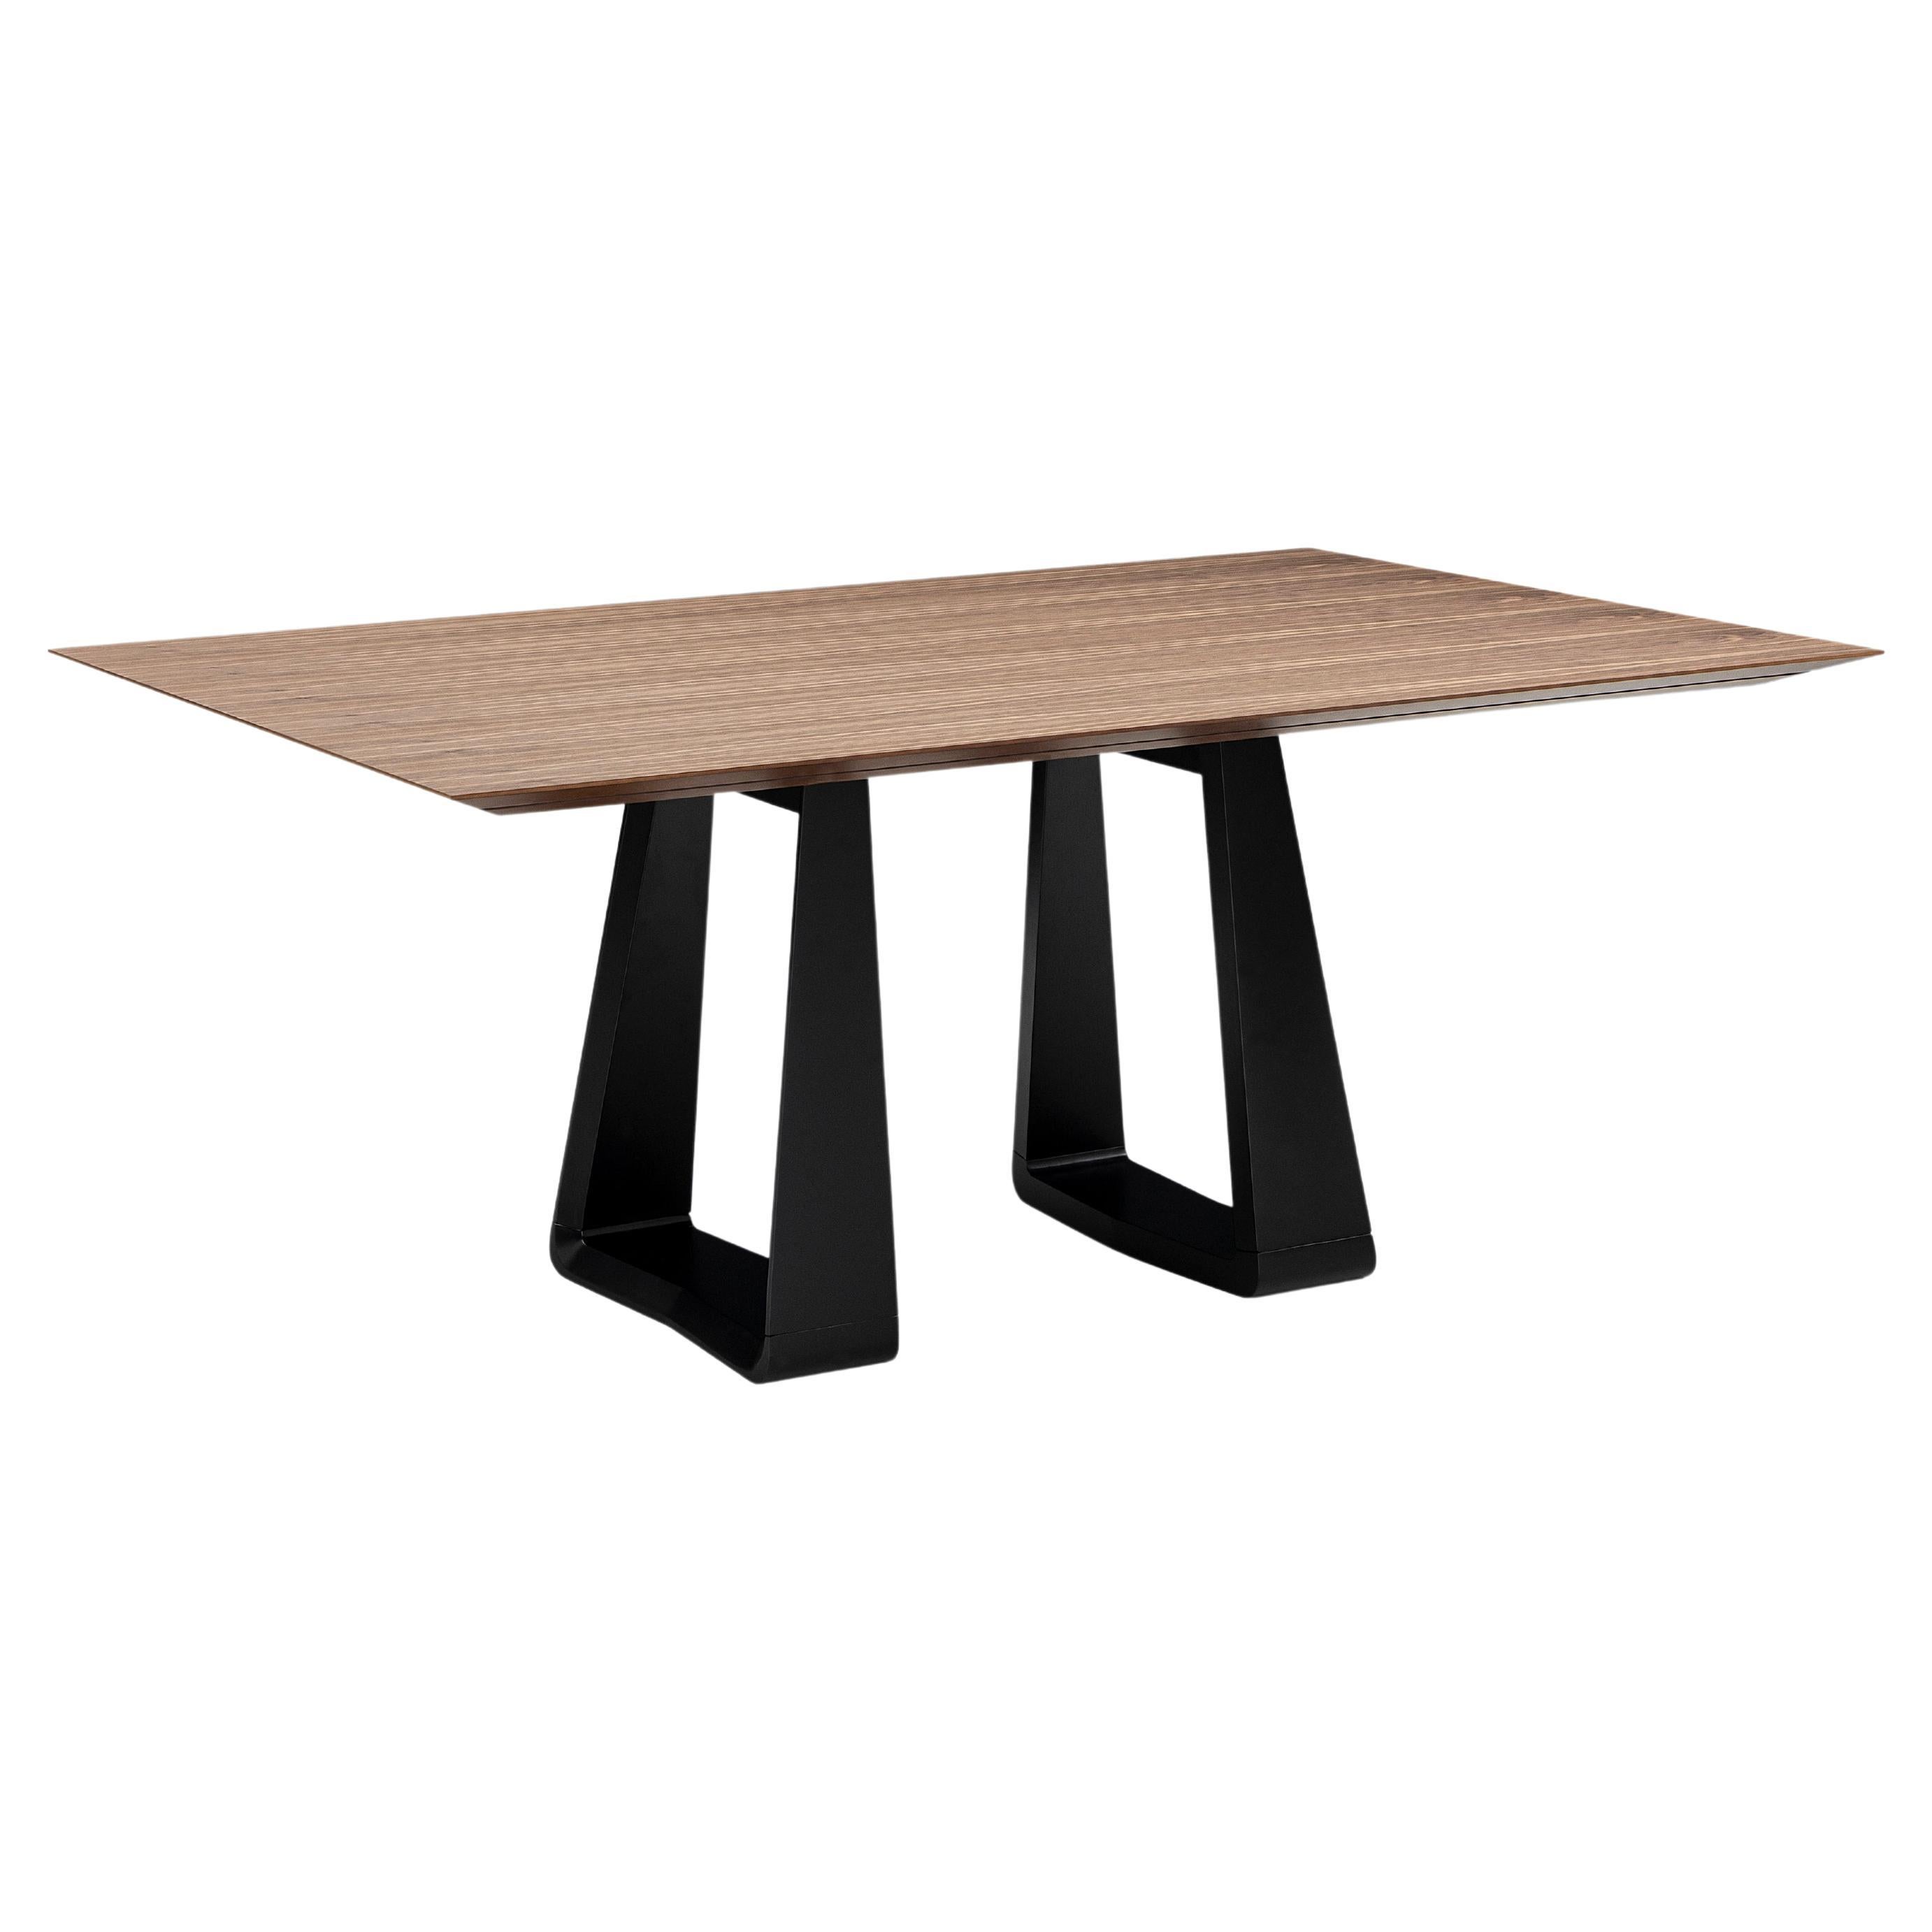 Wing Dining Table with a Walnut Wood Veneered Table Top and Black Base 67''